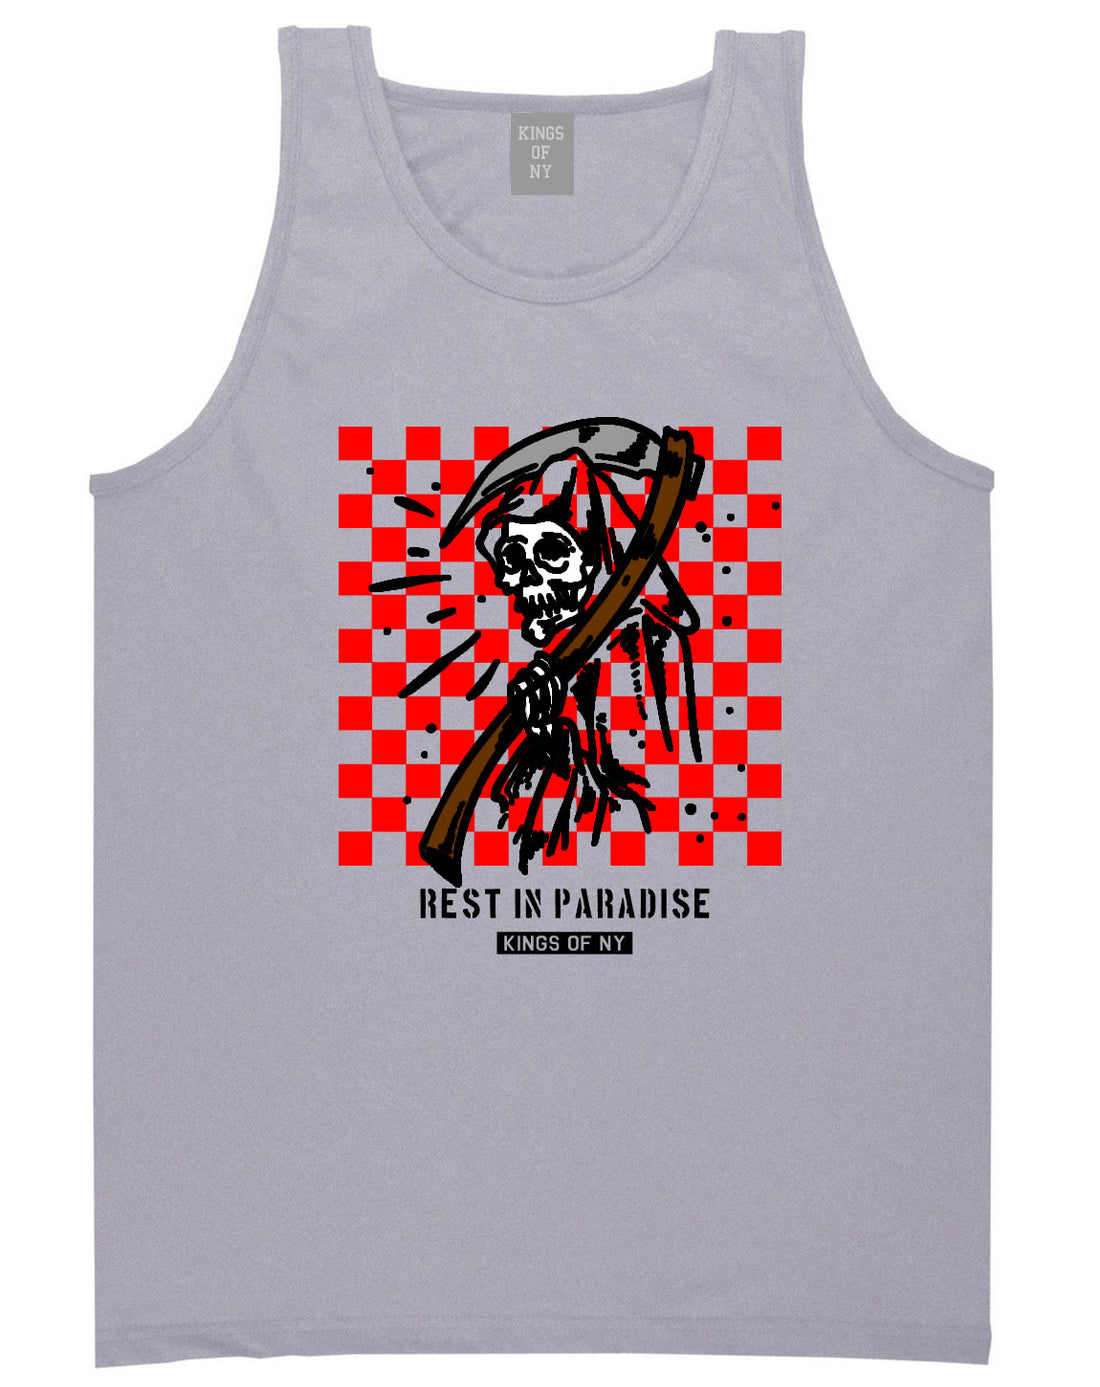 Rest In Paradise Grim Reaper Mens Tank Top Shirt Grey By Kings Of NY